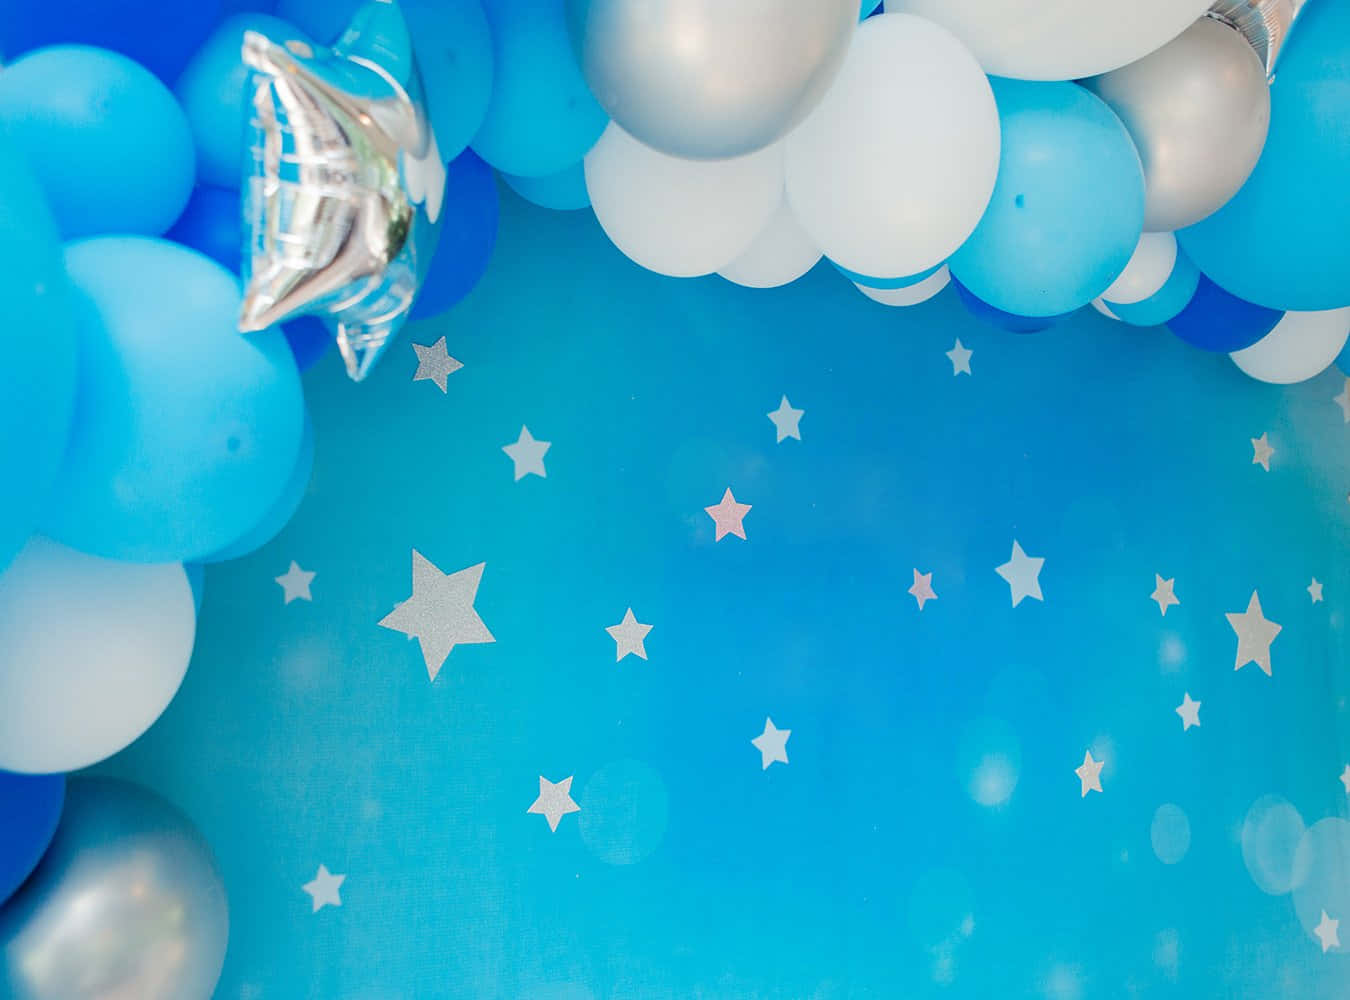 Celebrate a special day with this stunning blue birthday background